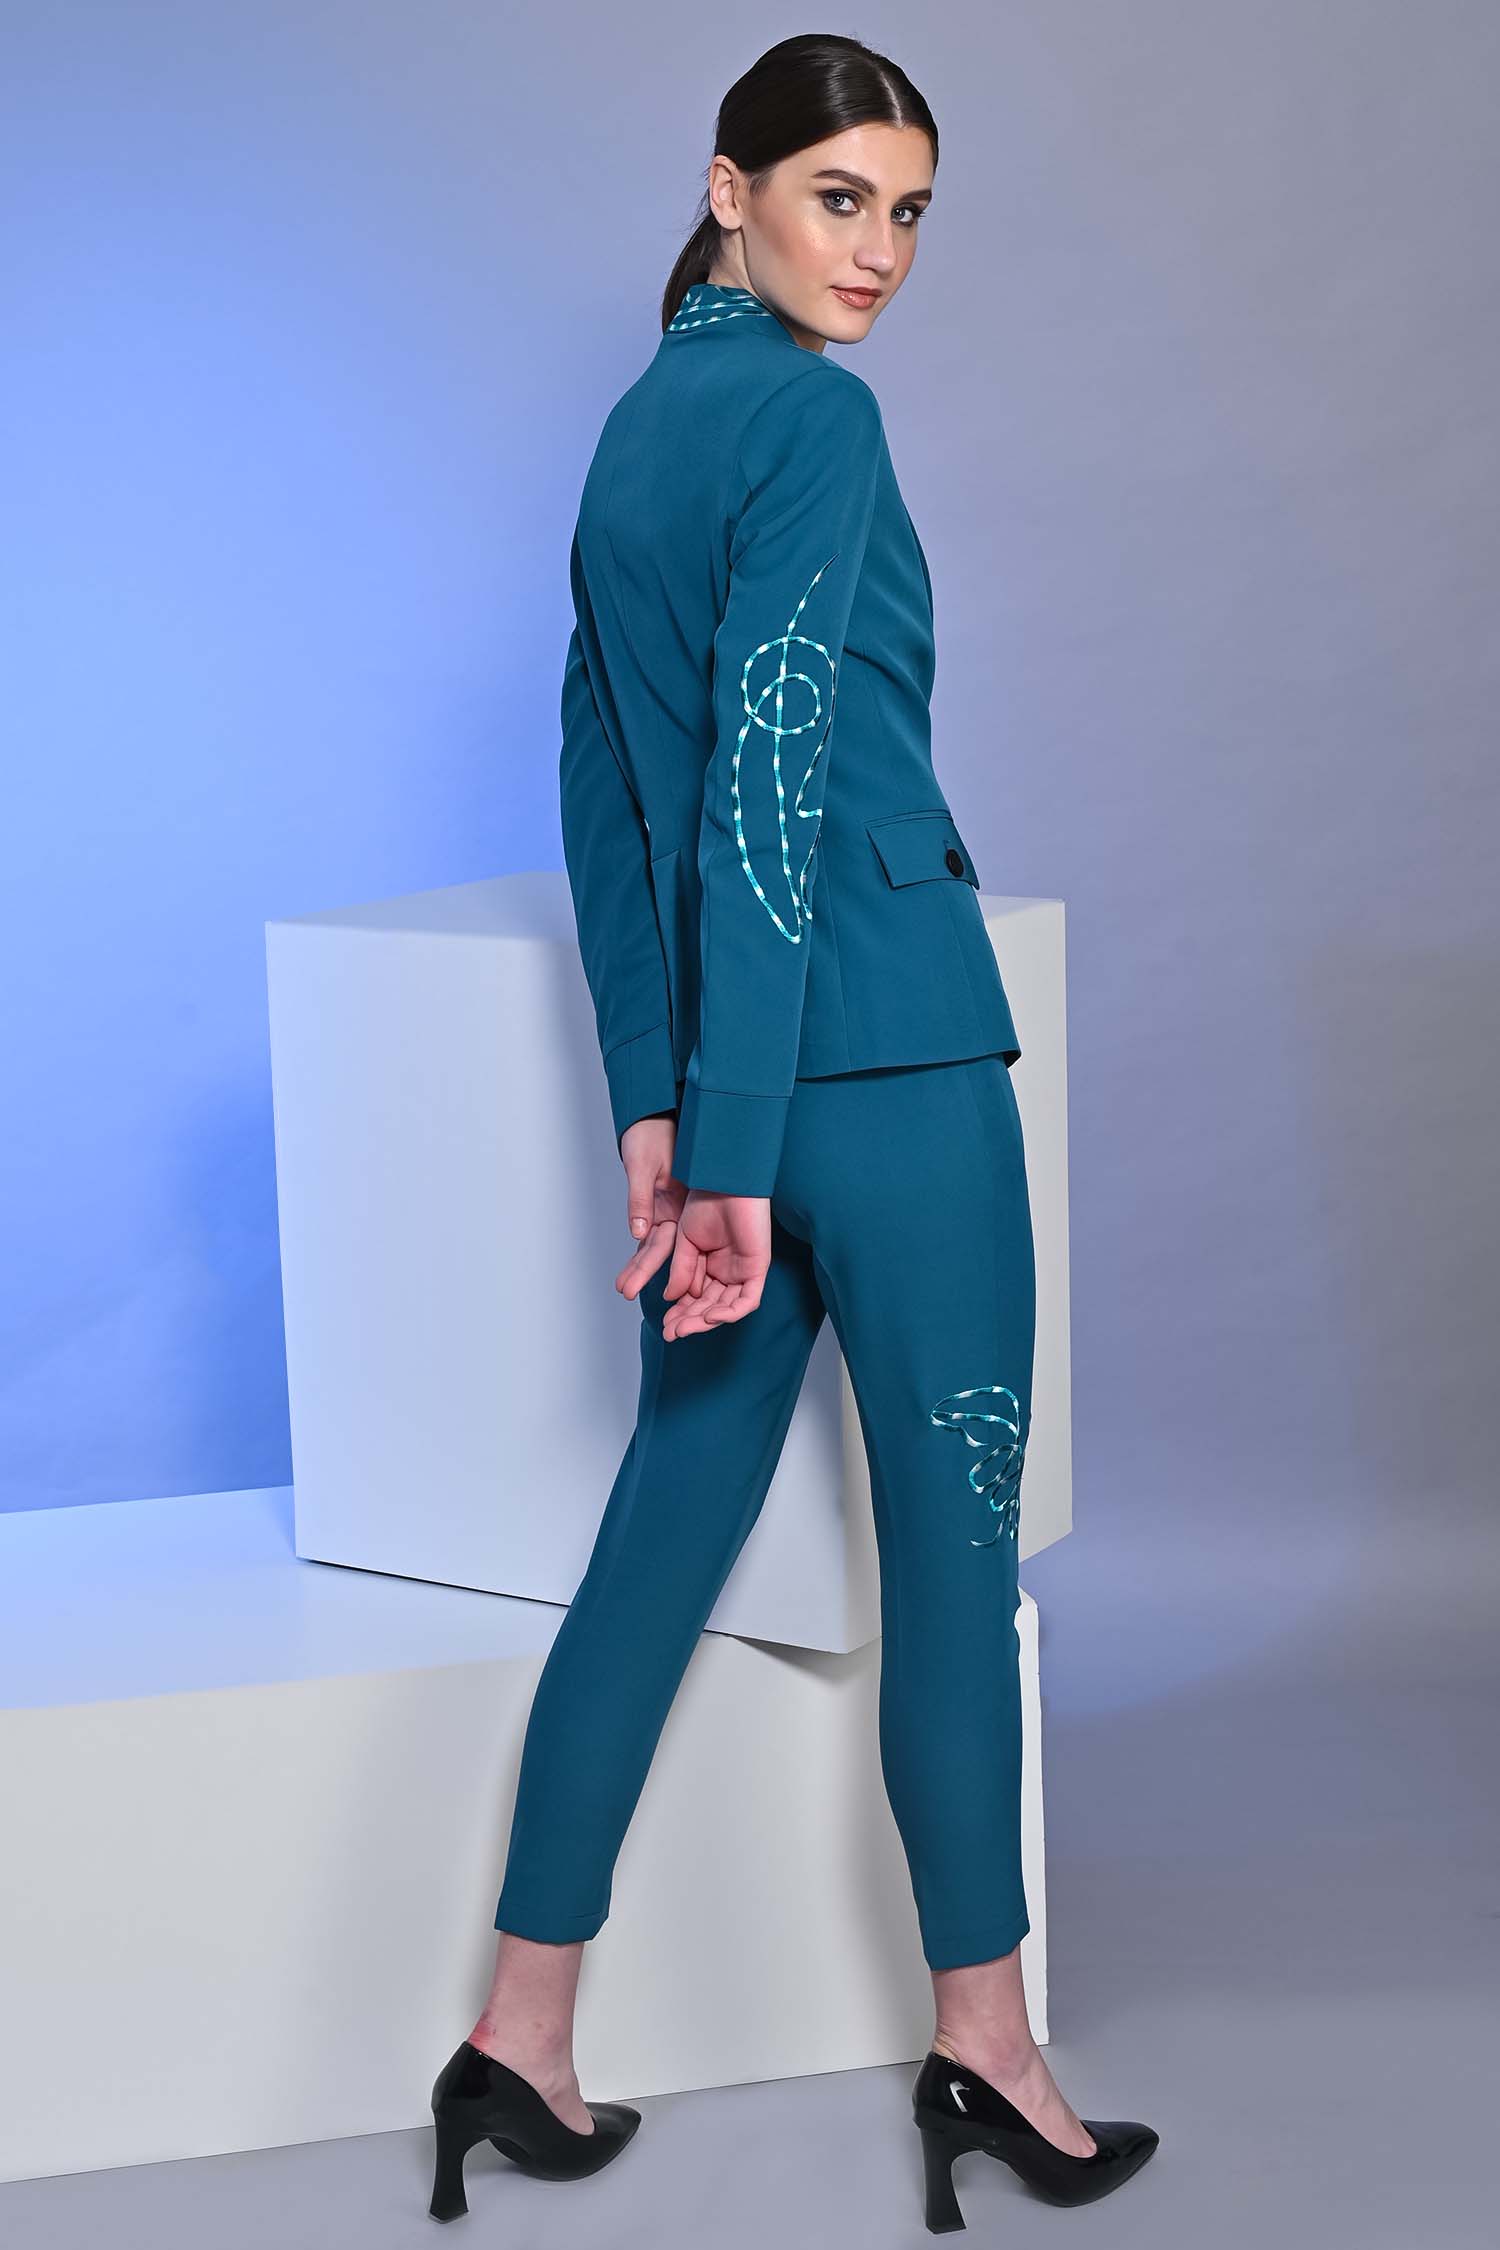 Teal Blue Embroidered Blazer With Crop Top And Slim Fit Pants